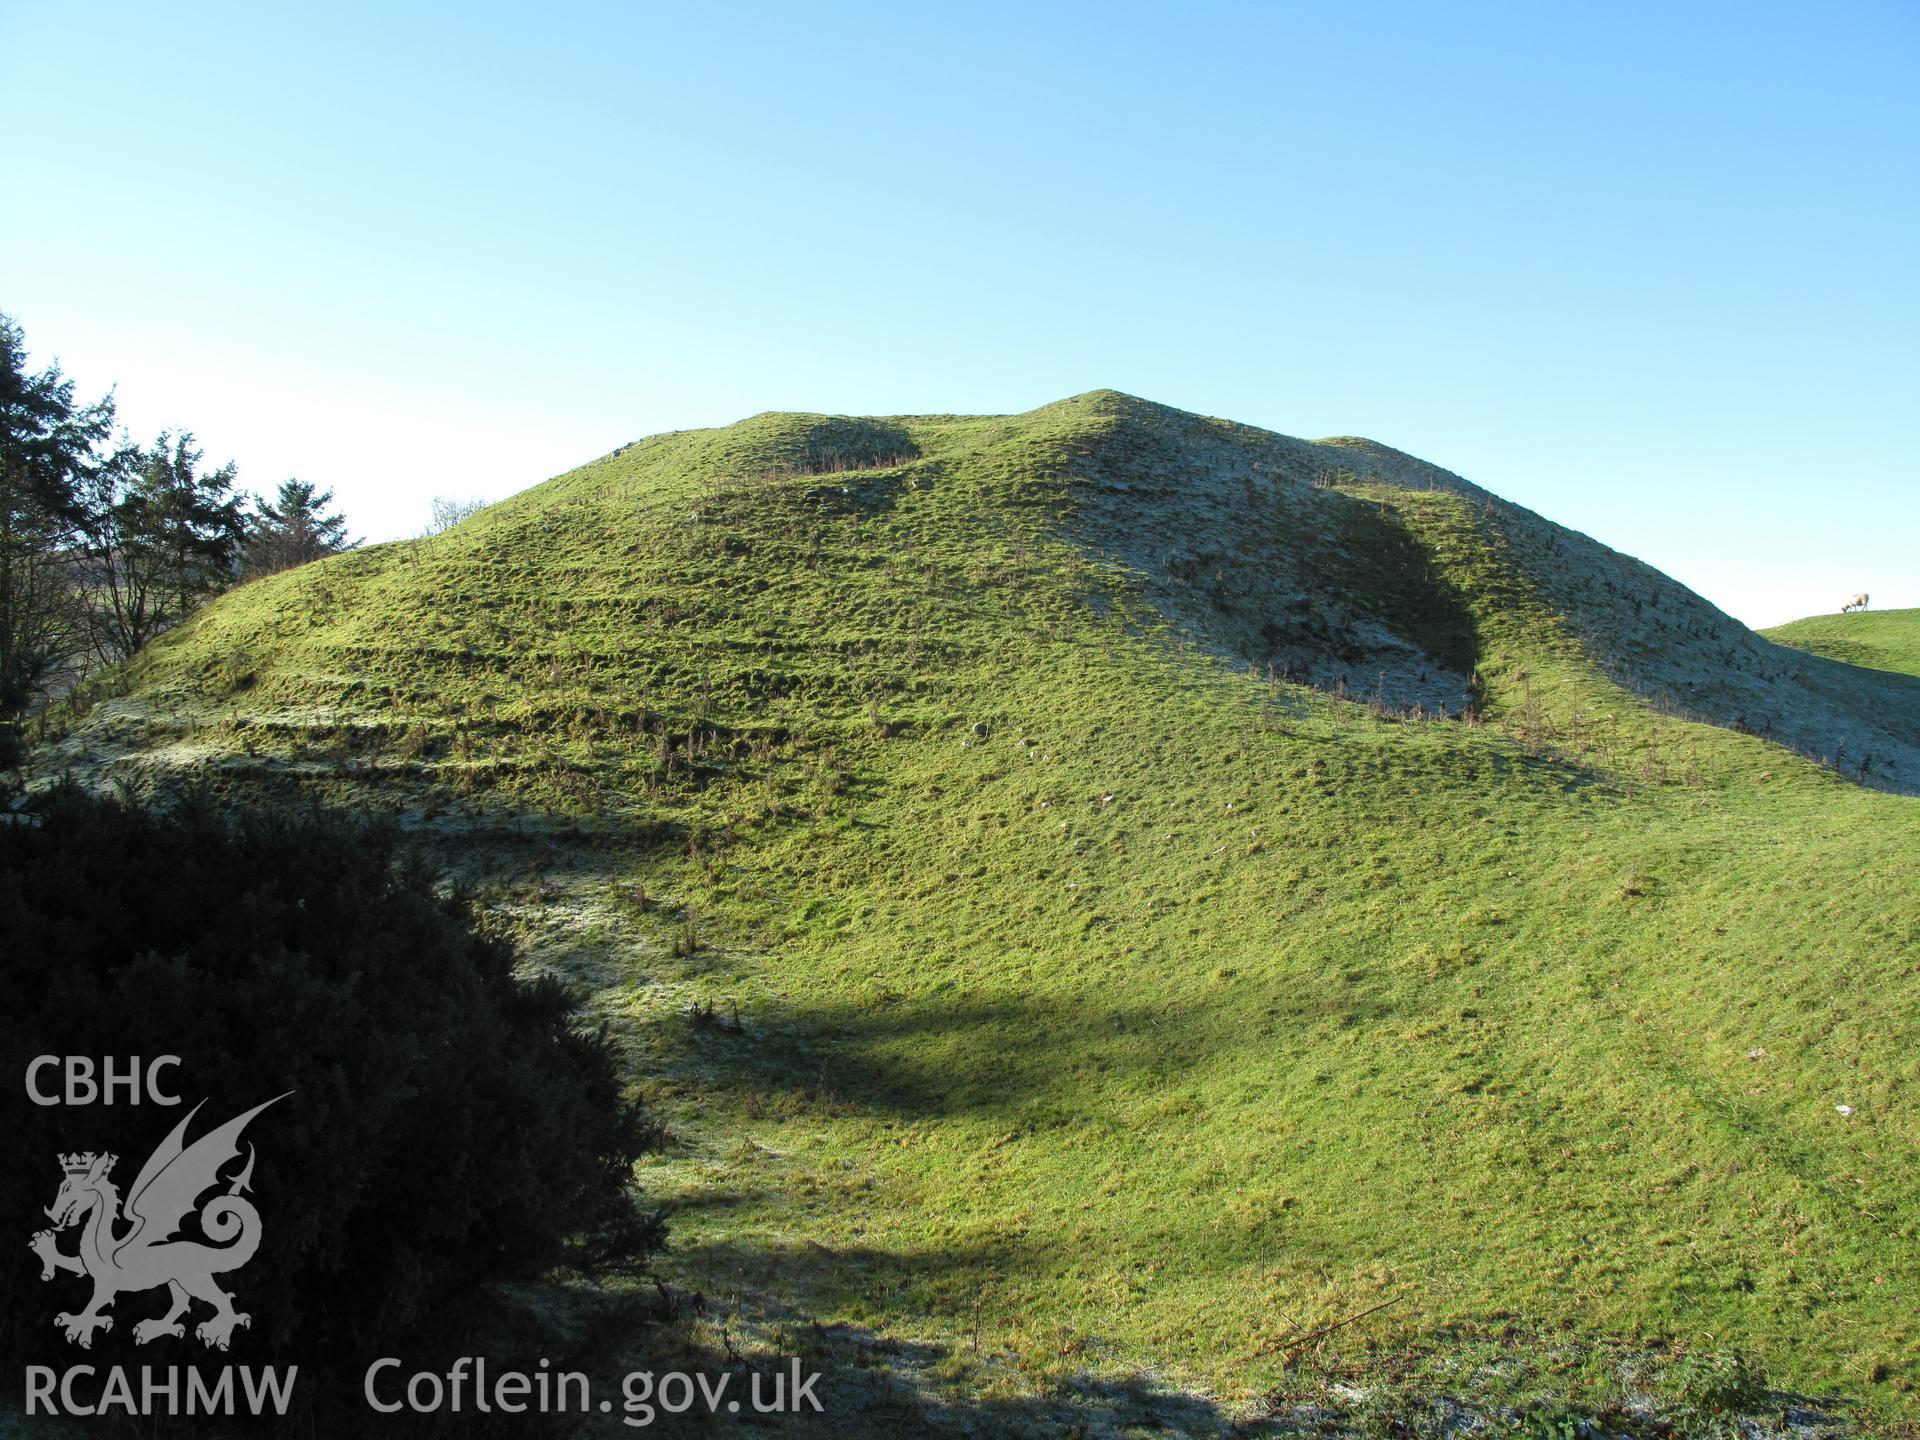 Painscastle motte from the east, taken by Brian Malaws on 15 November 2010.